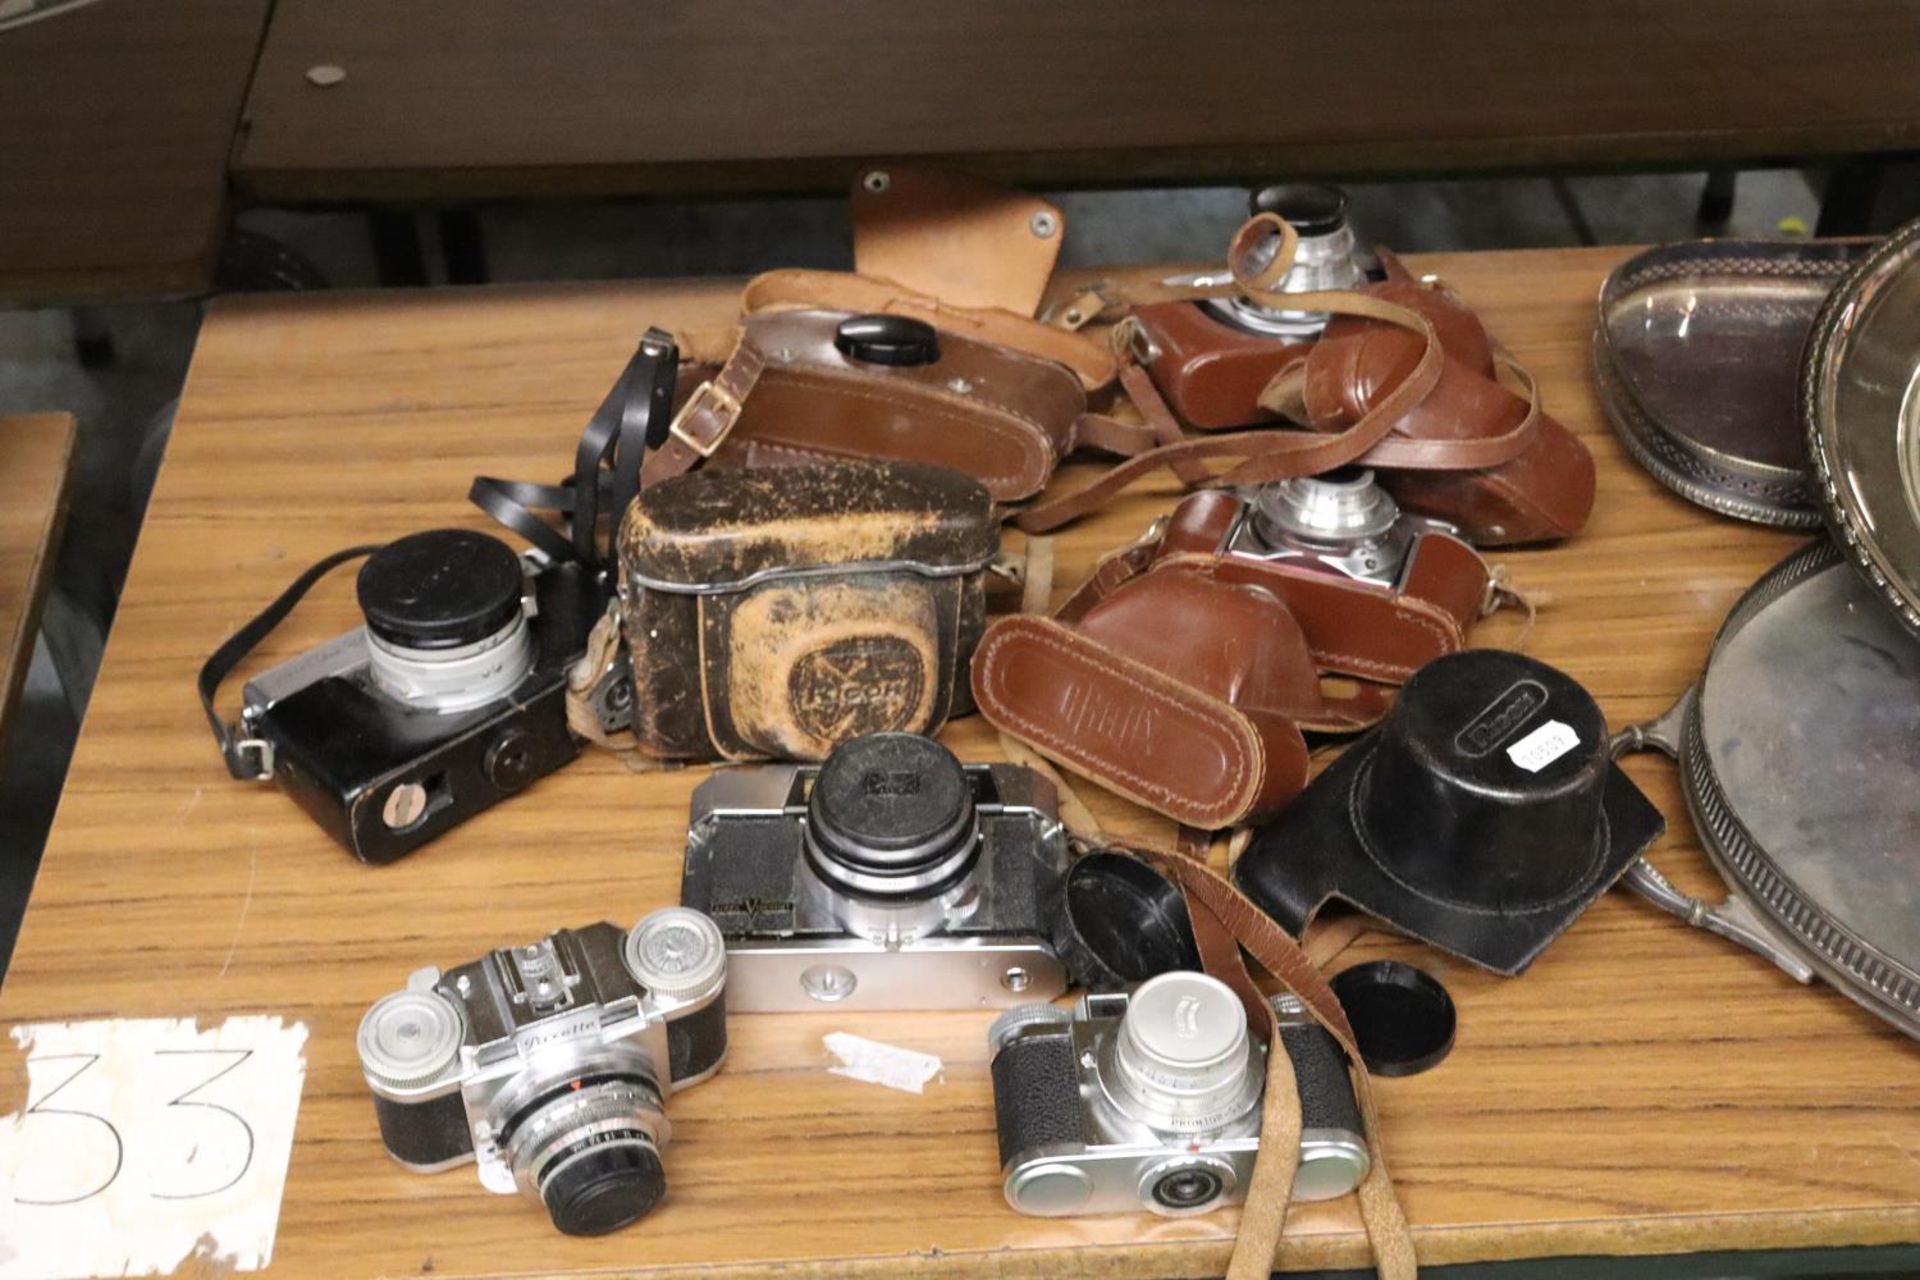 A COLLECTION OF VINTAGE CAMERAS TO INCLUDE A BRAUN PAXETTE, RICOH 300, ALTIX-N, PURMA SPCIAL, ETC,